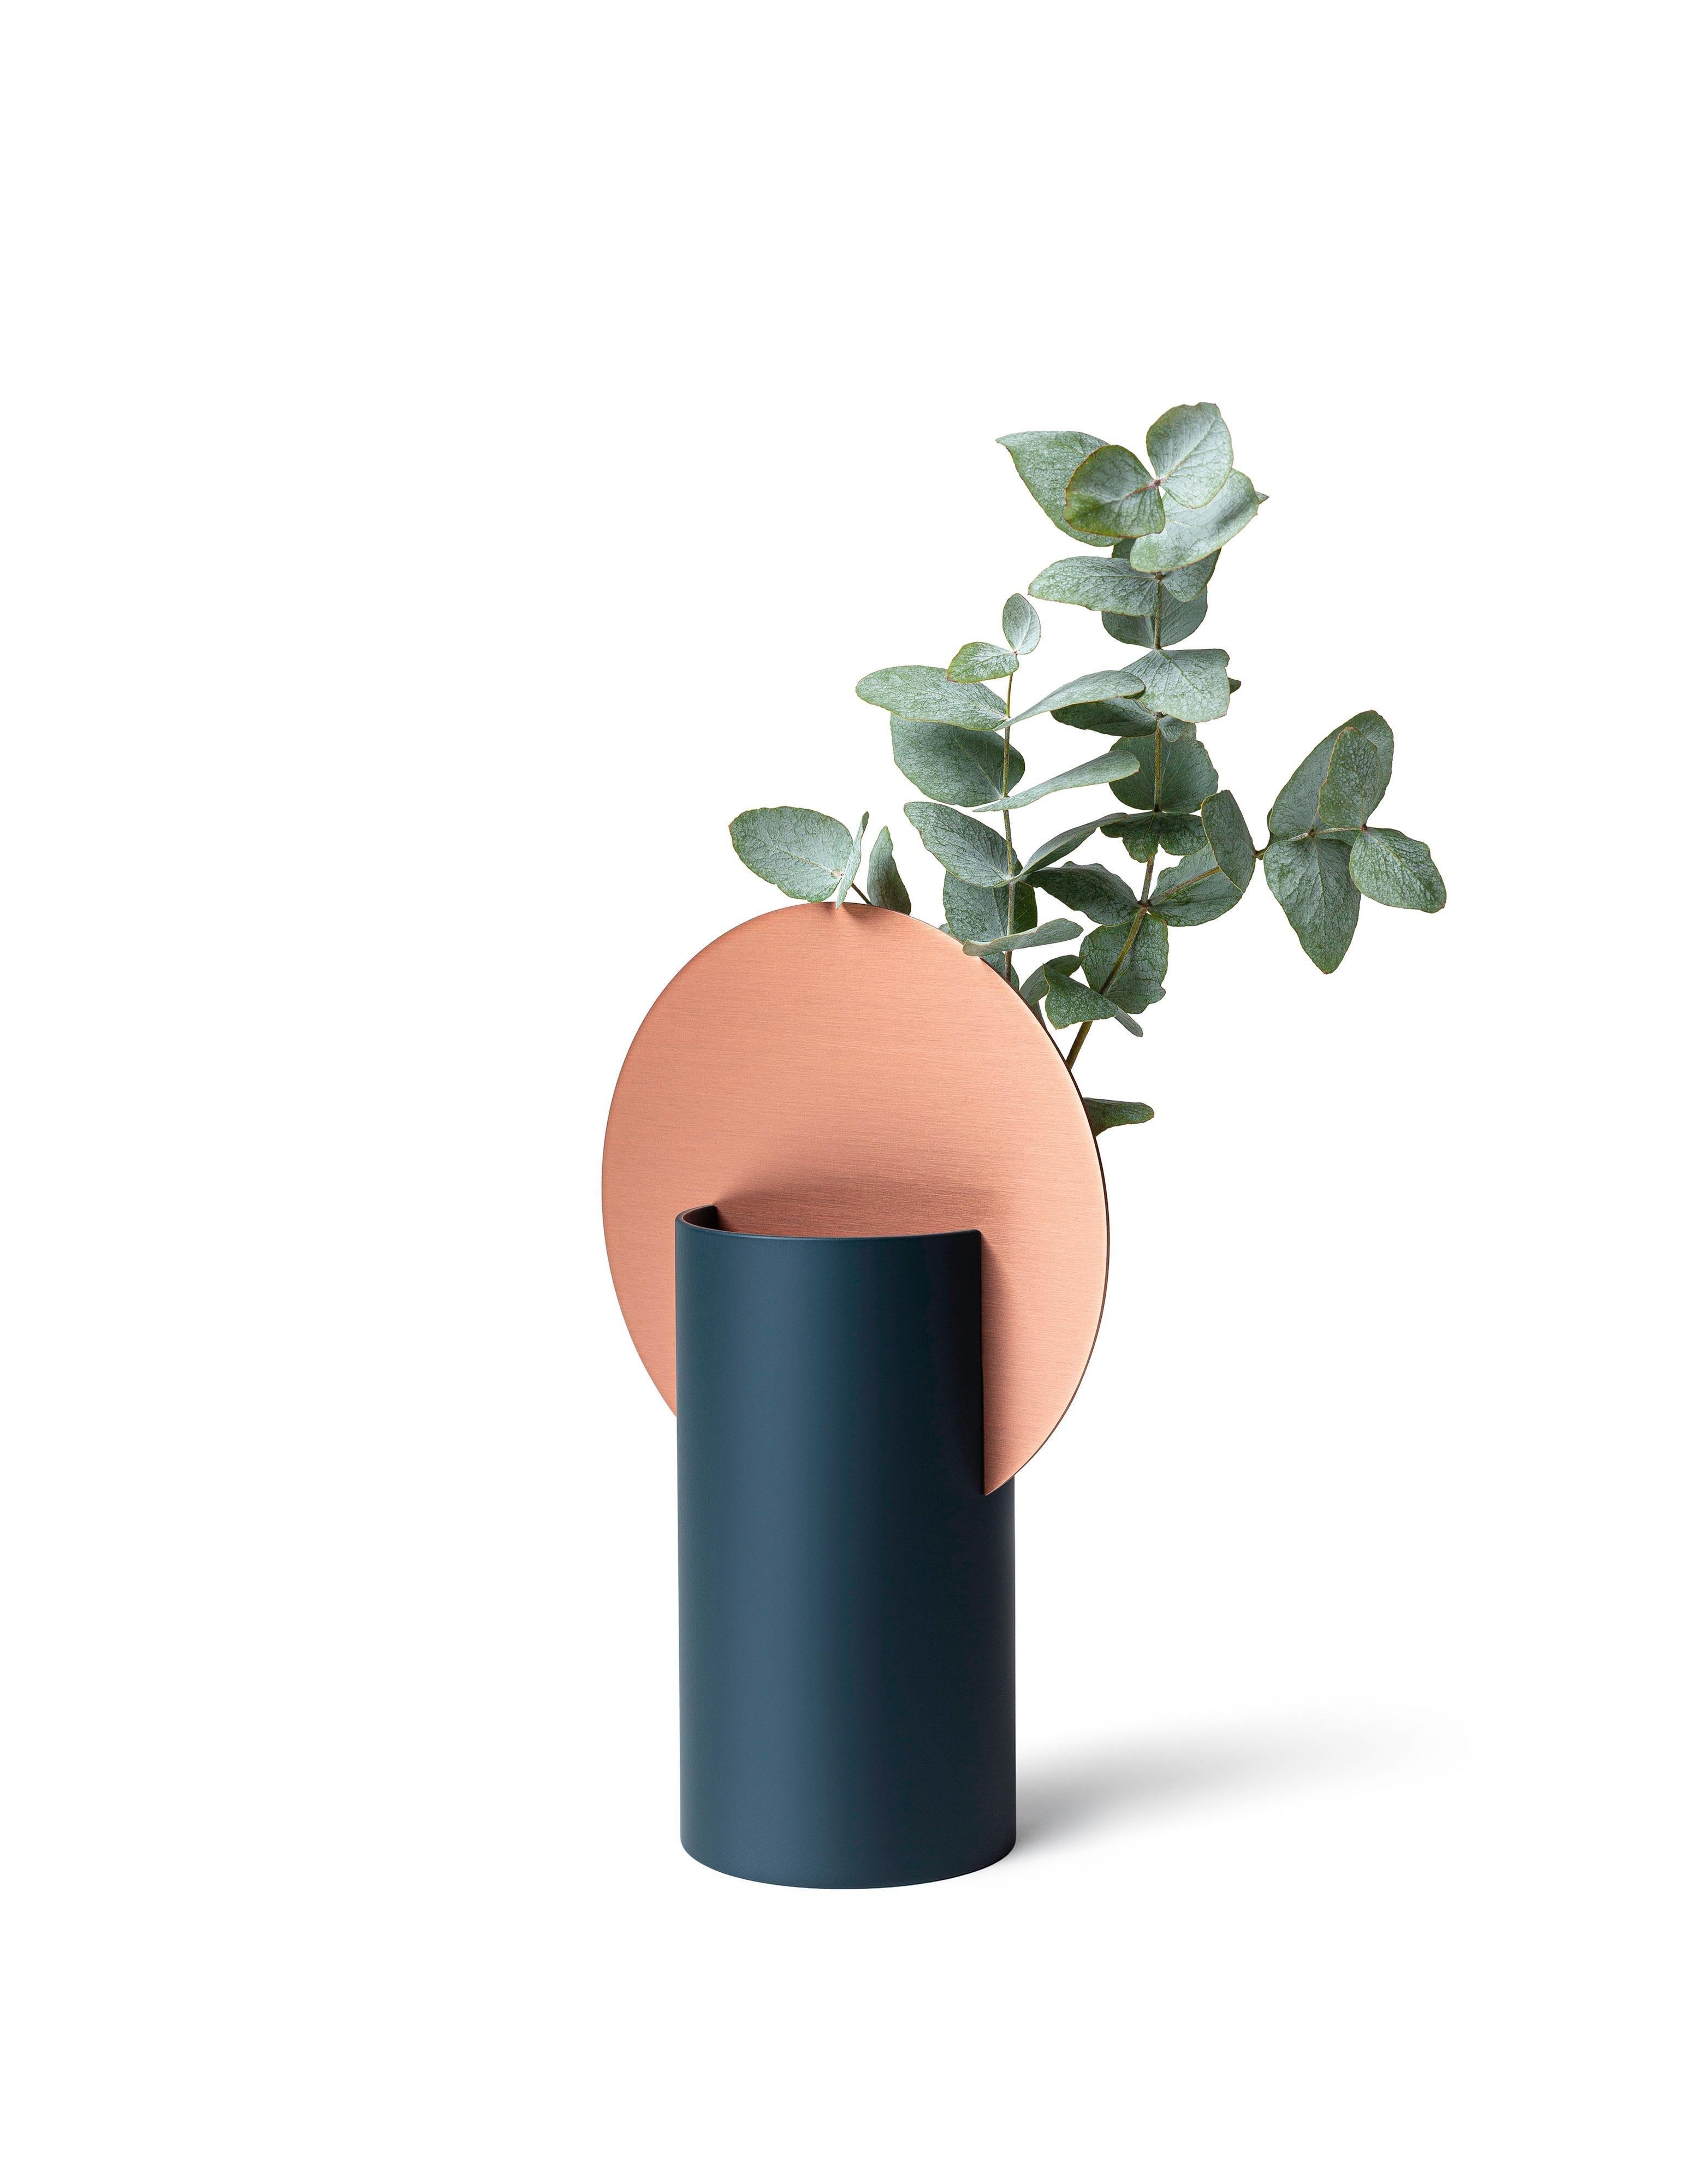 Organic Modern Contemporary 'Malevich Vase CS5' by Noom, Copper and Green Steel For Sale